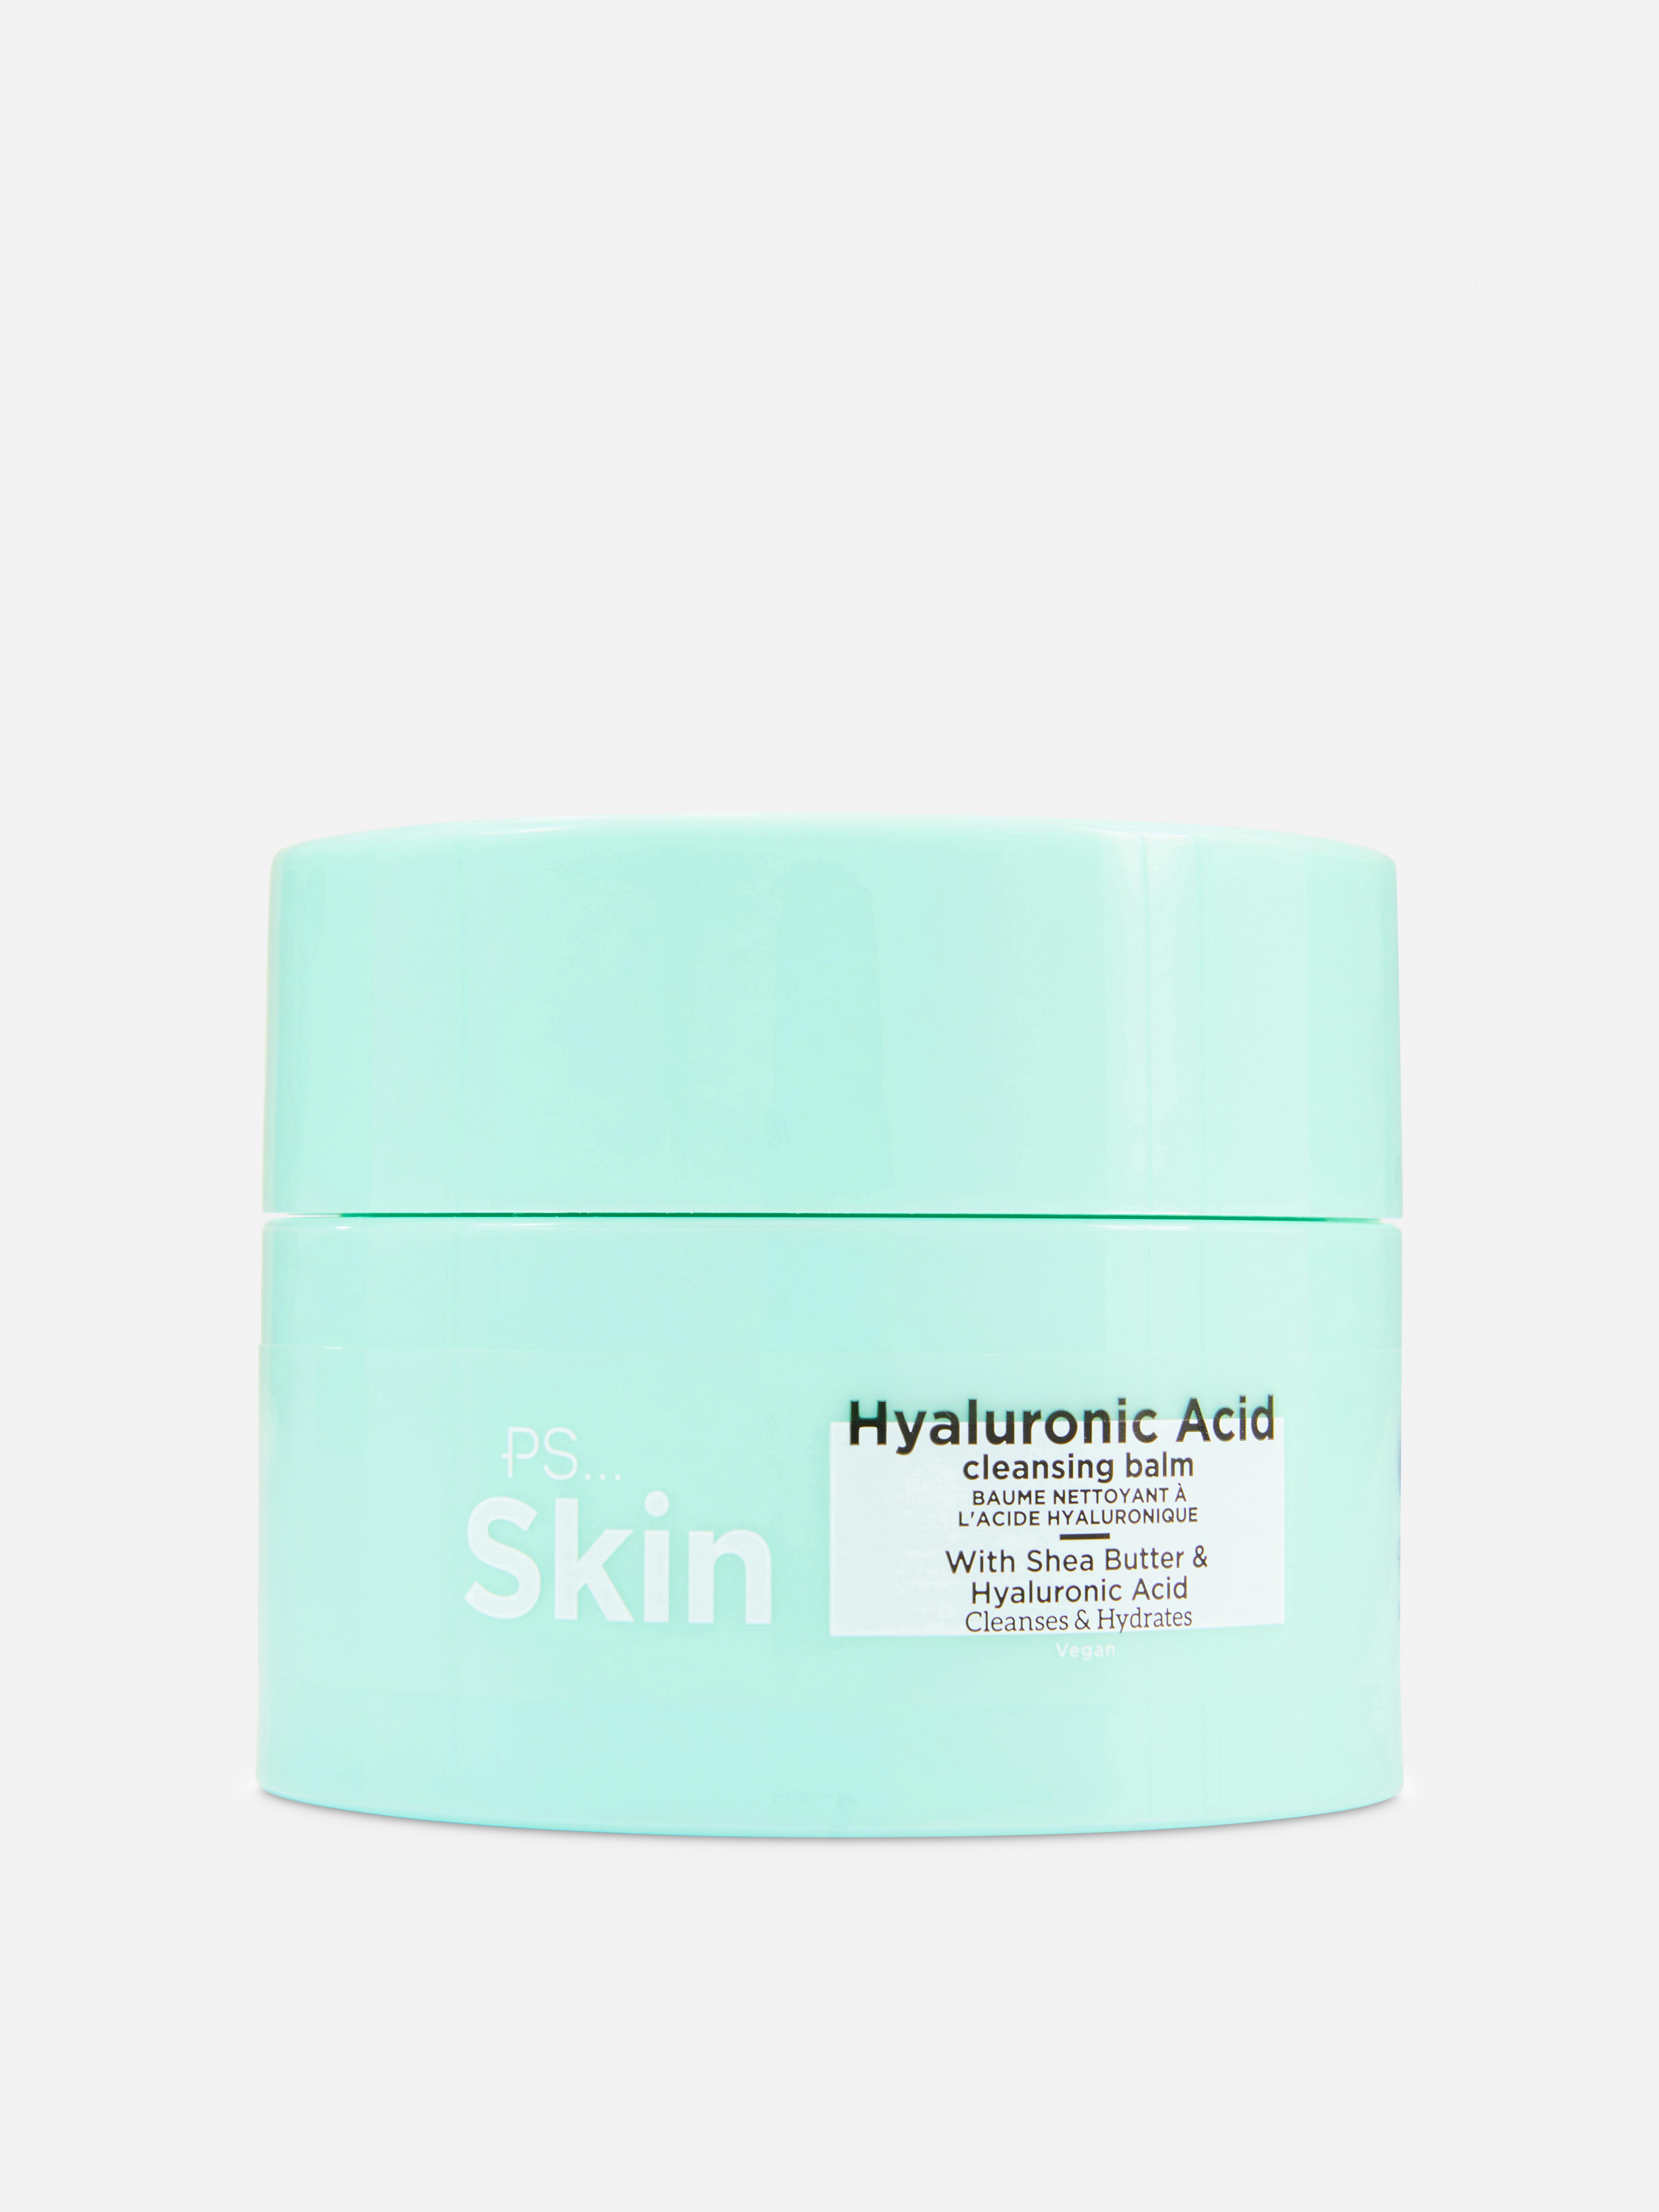 PS Skin Hyaluronic Acid Cleansing Balm